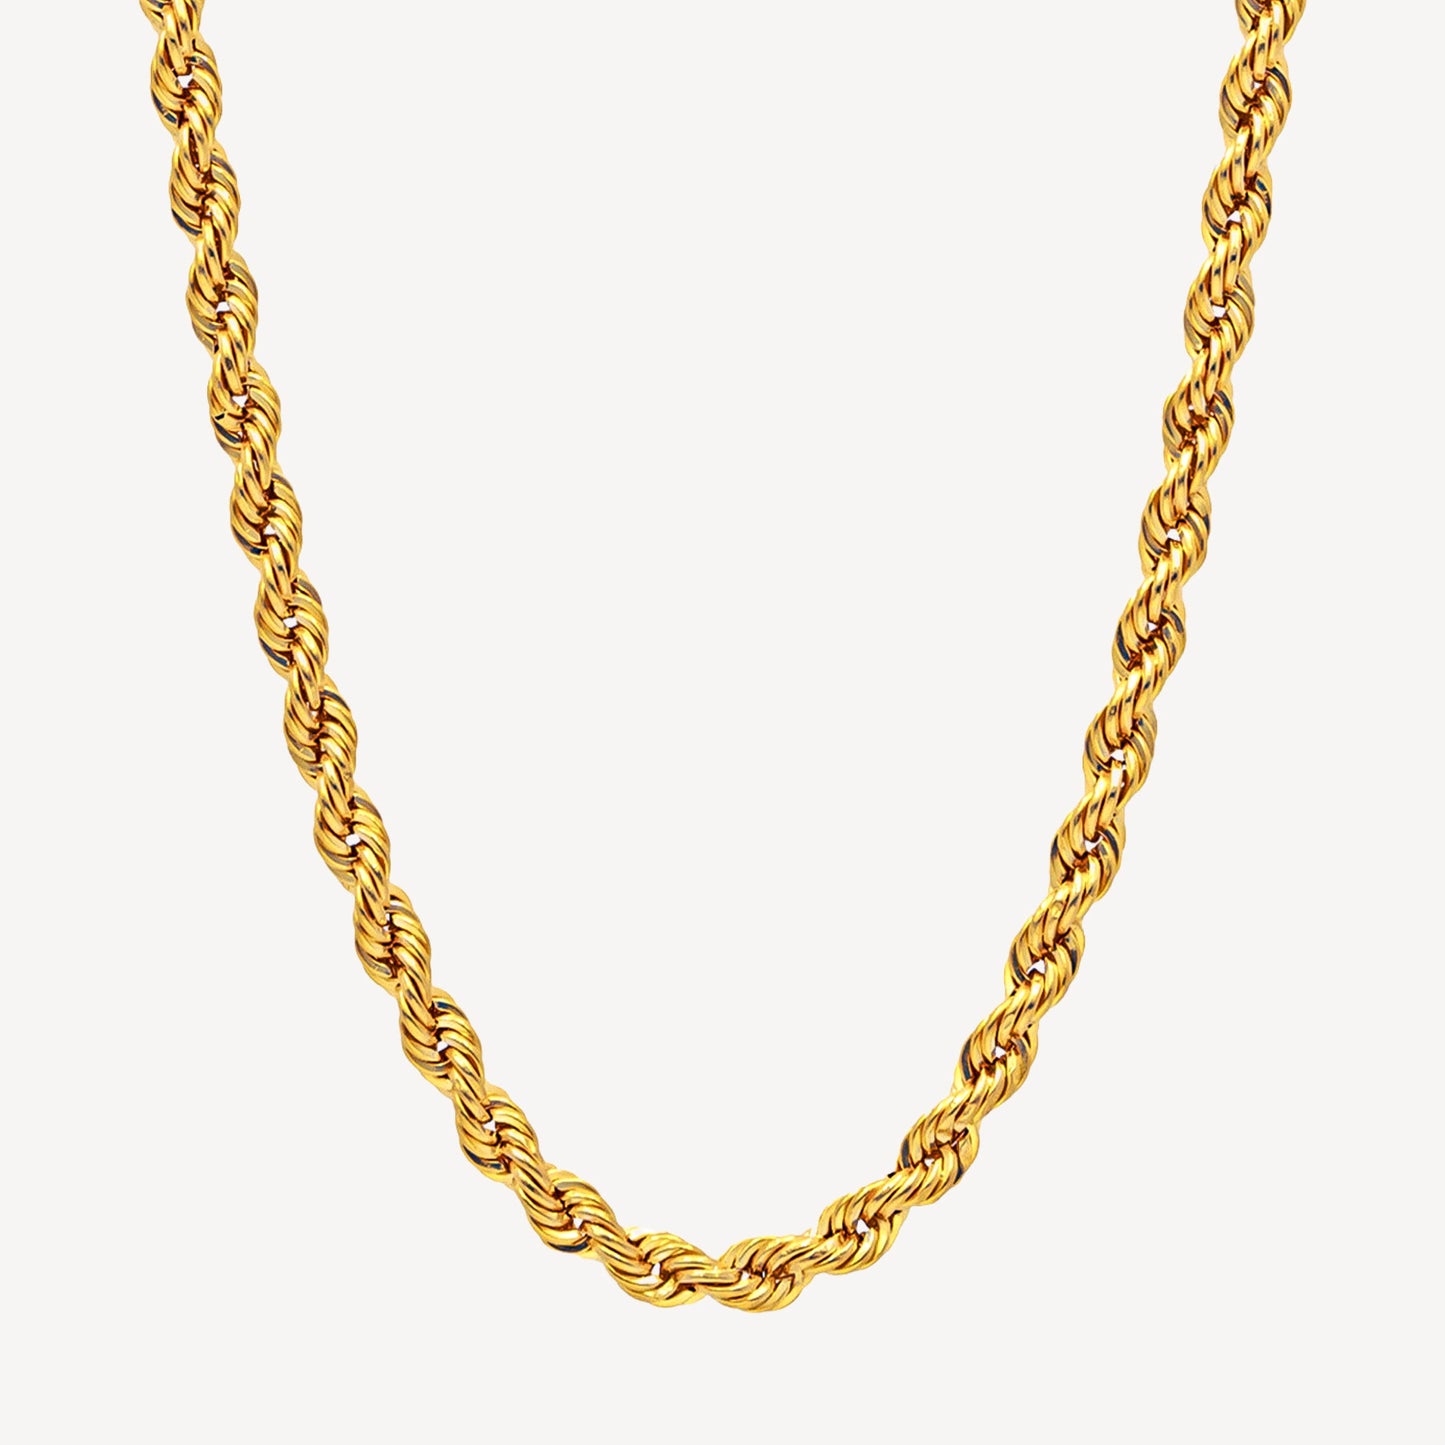 916 Gold Hollow Rope Chain (2.5mm Series) 20/22/24 Inches